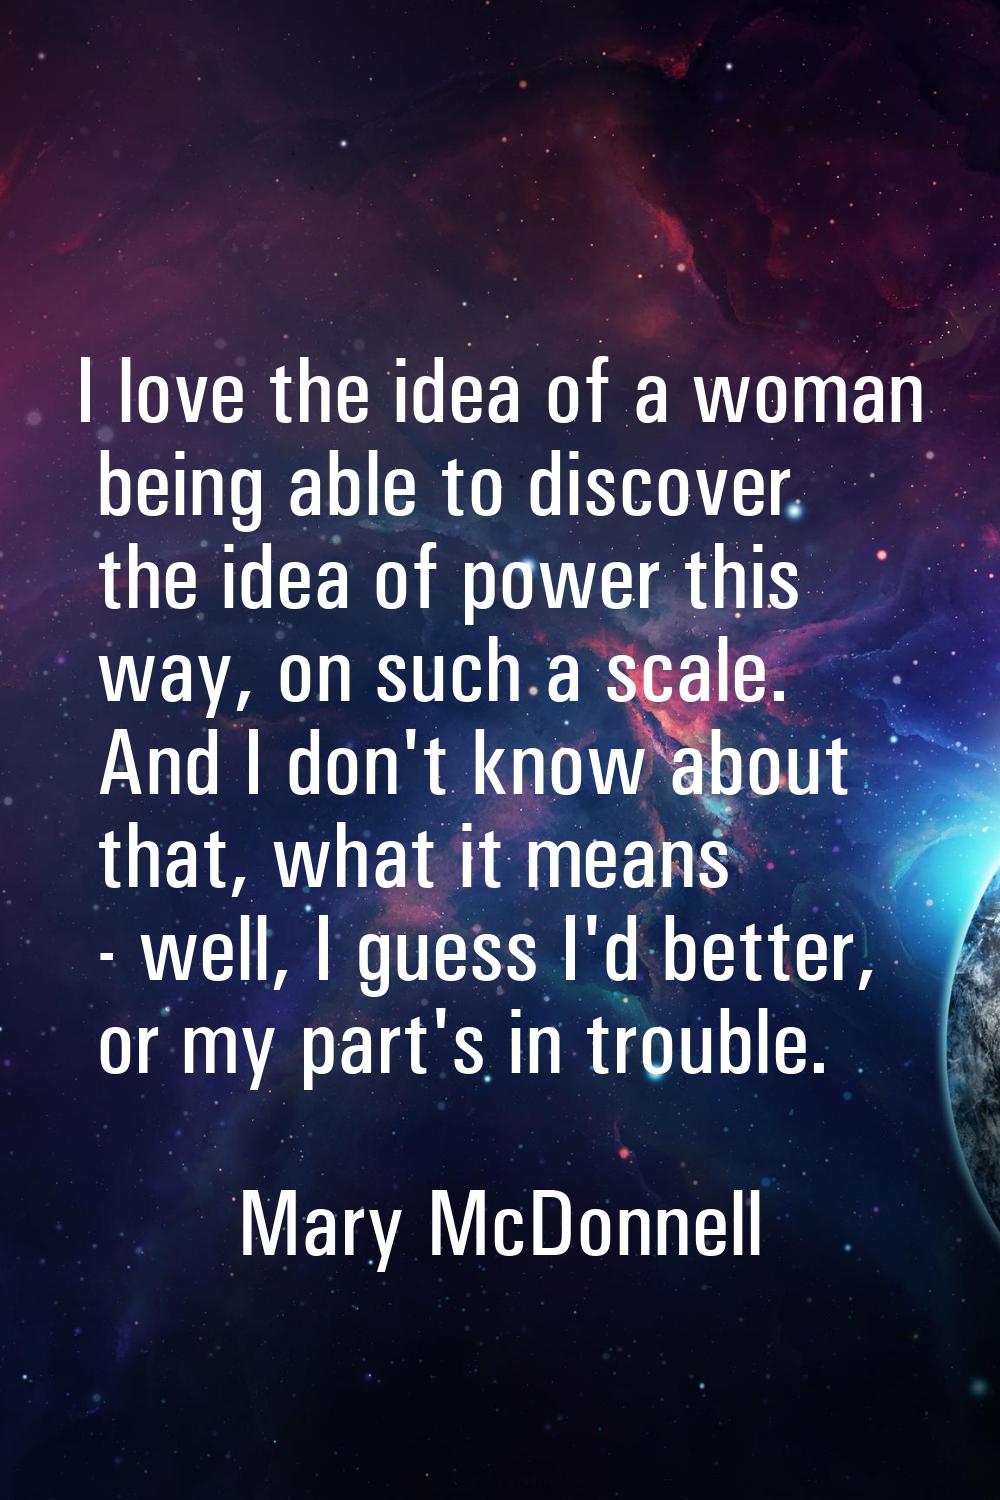 I love the idea of a woman being able to discover the idea of power this way, on such a scale. And 